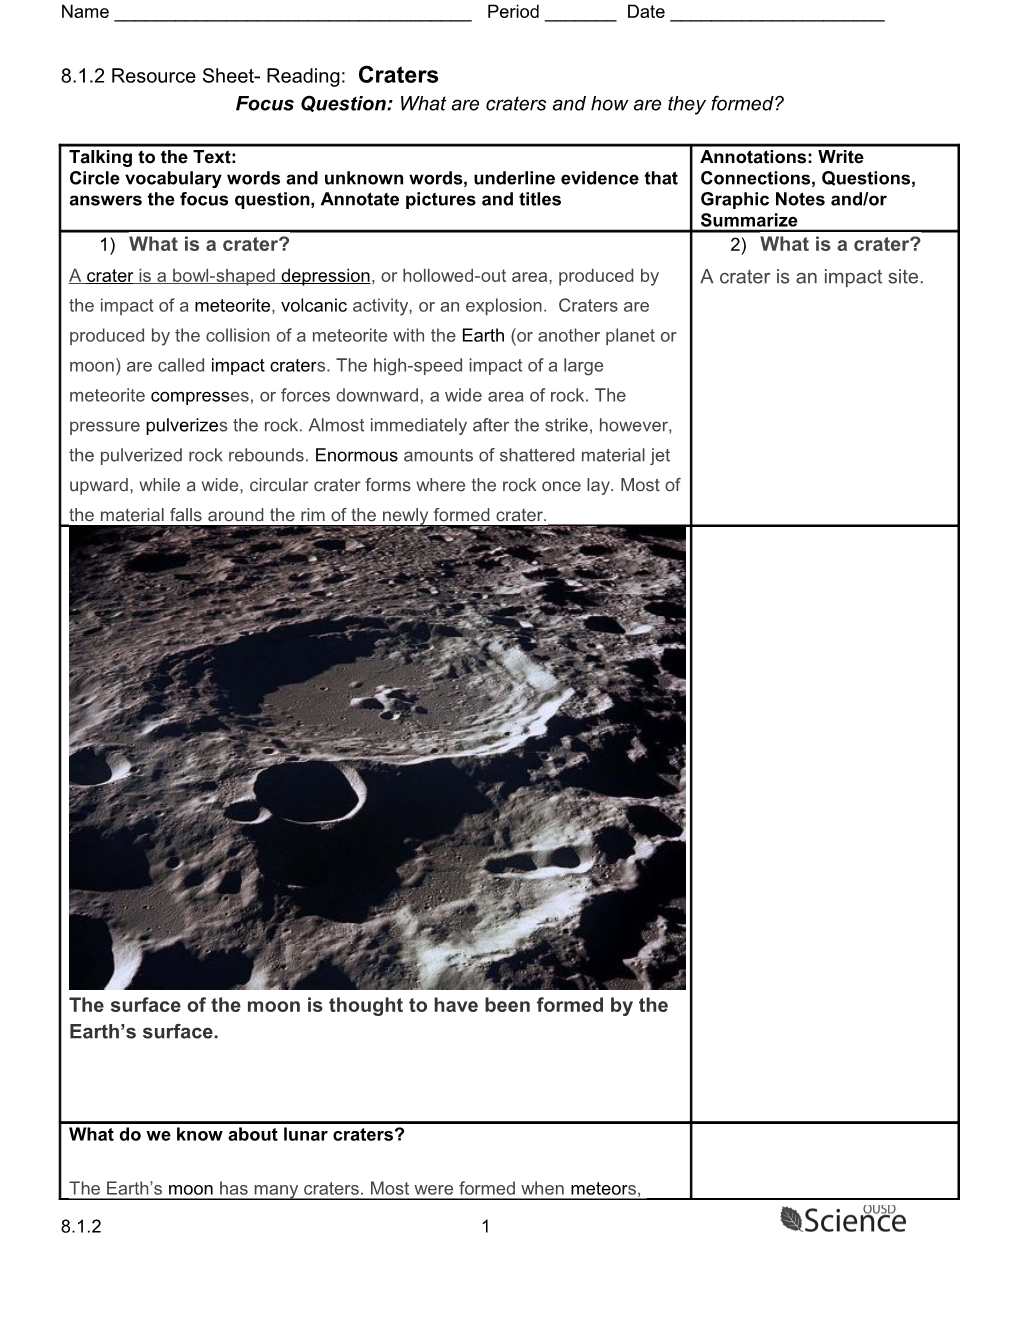 Focus Question: What Are Craters and How Are They Formed?